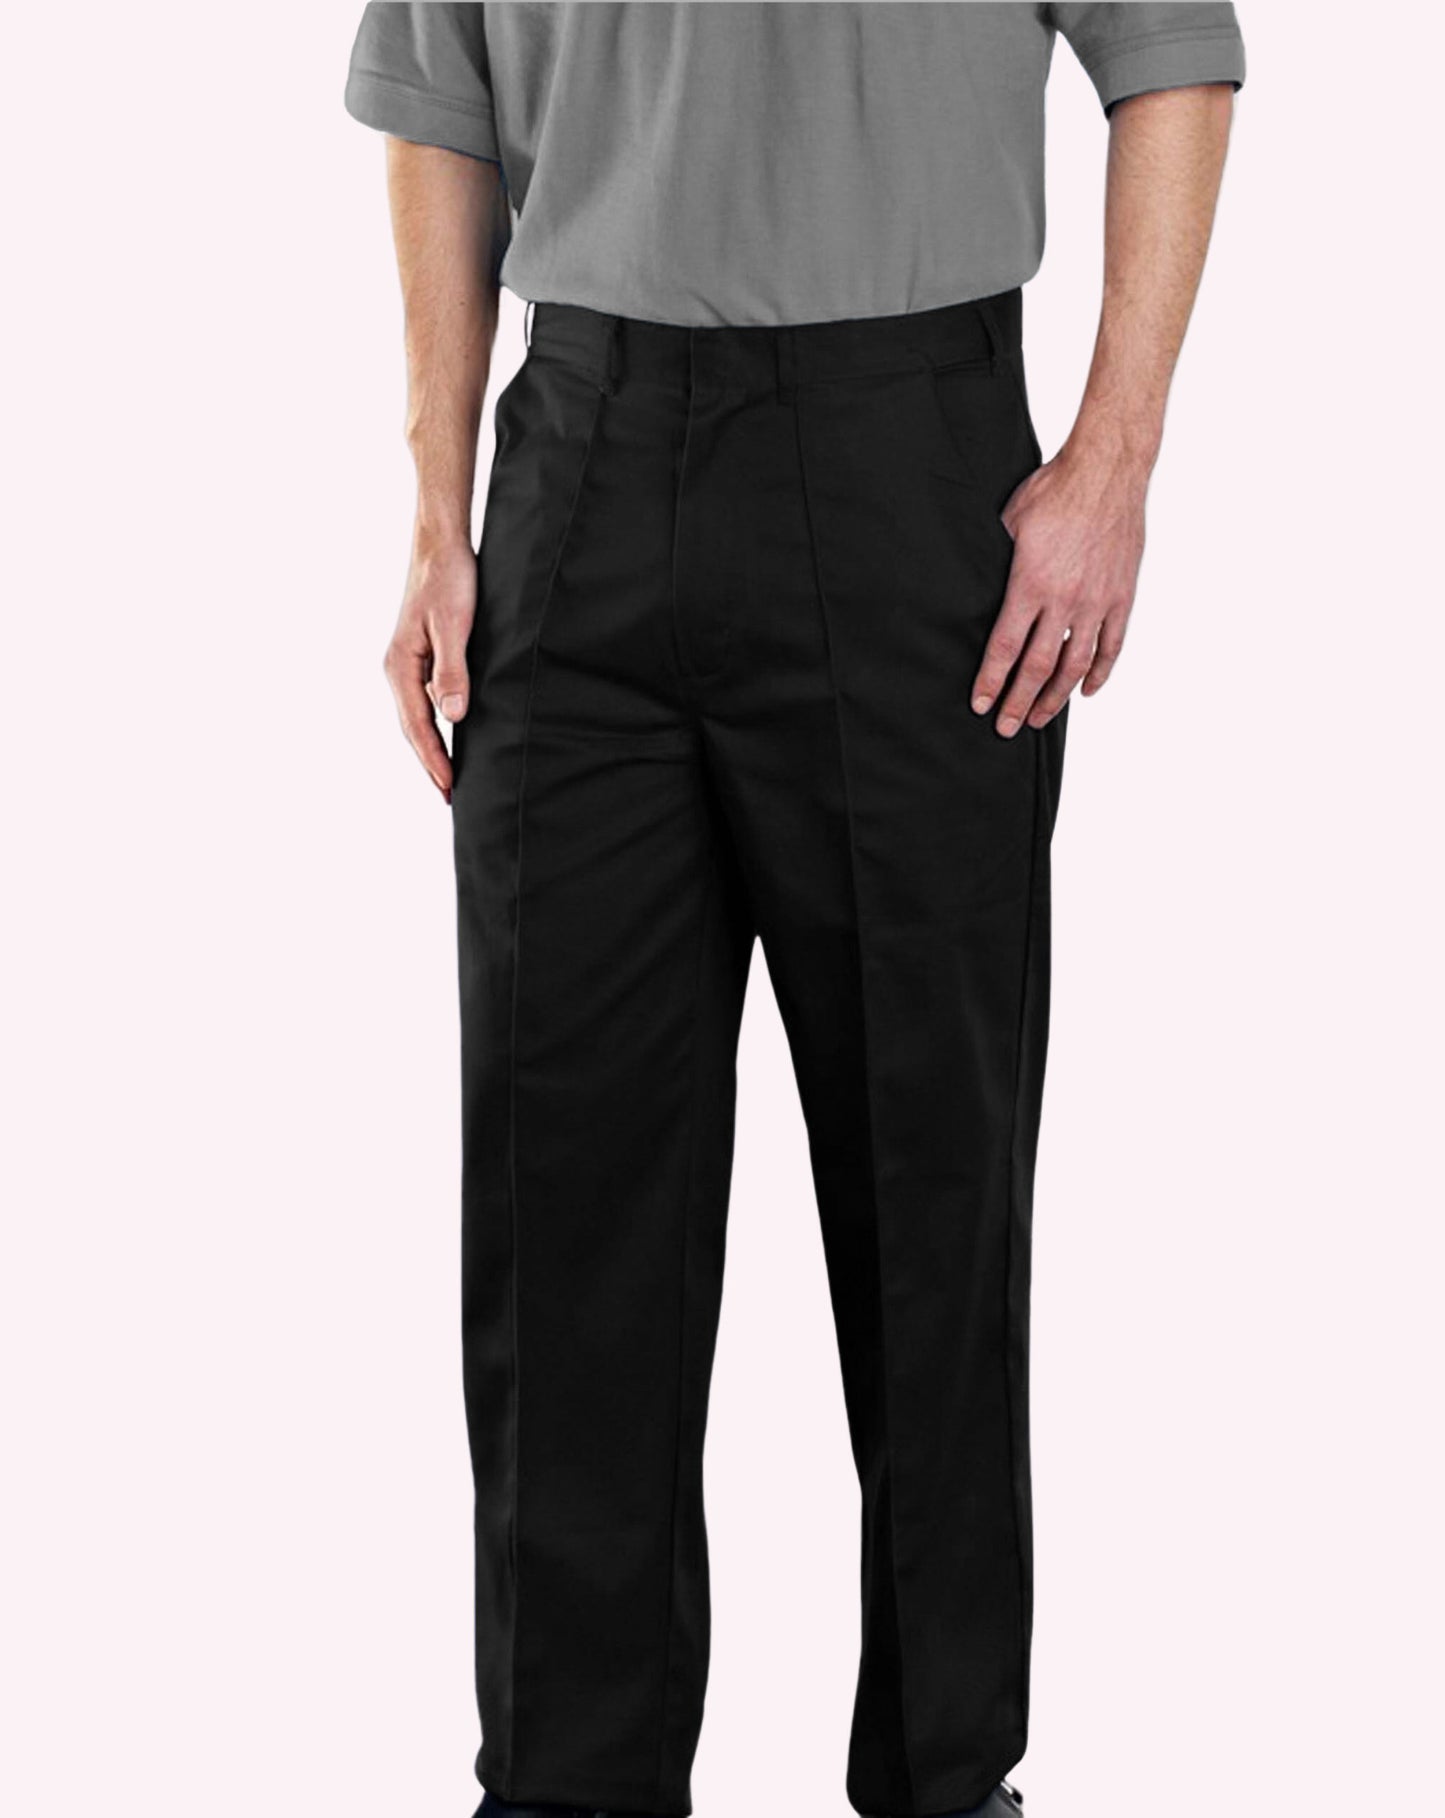 Male Work Trousers